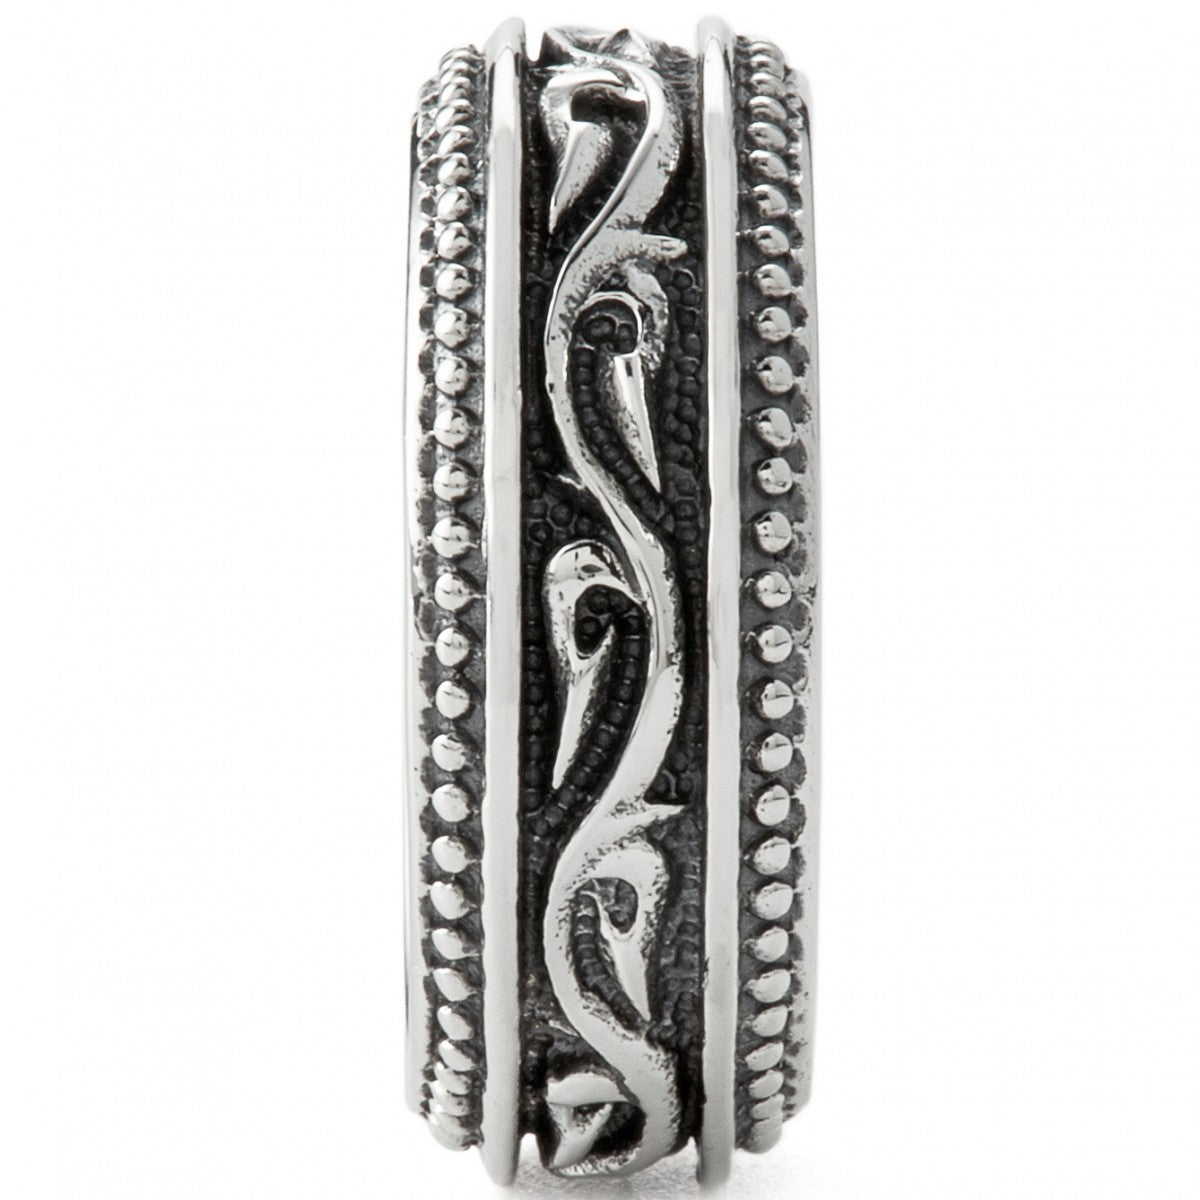 Scott Kay Unkaged Sparta Engraved Silver Knotted Ring